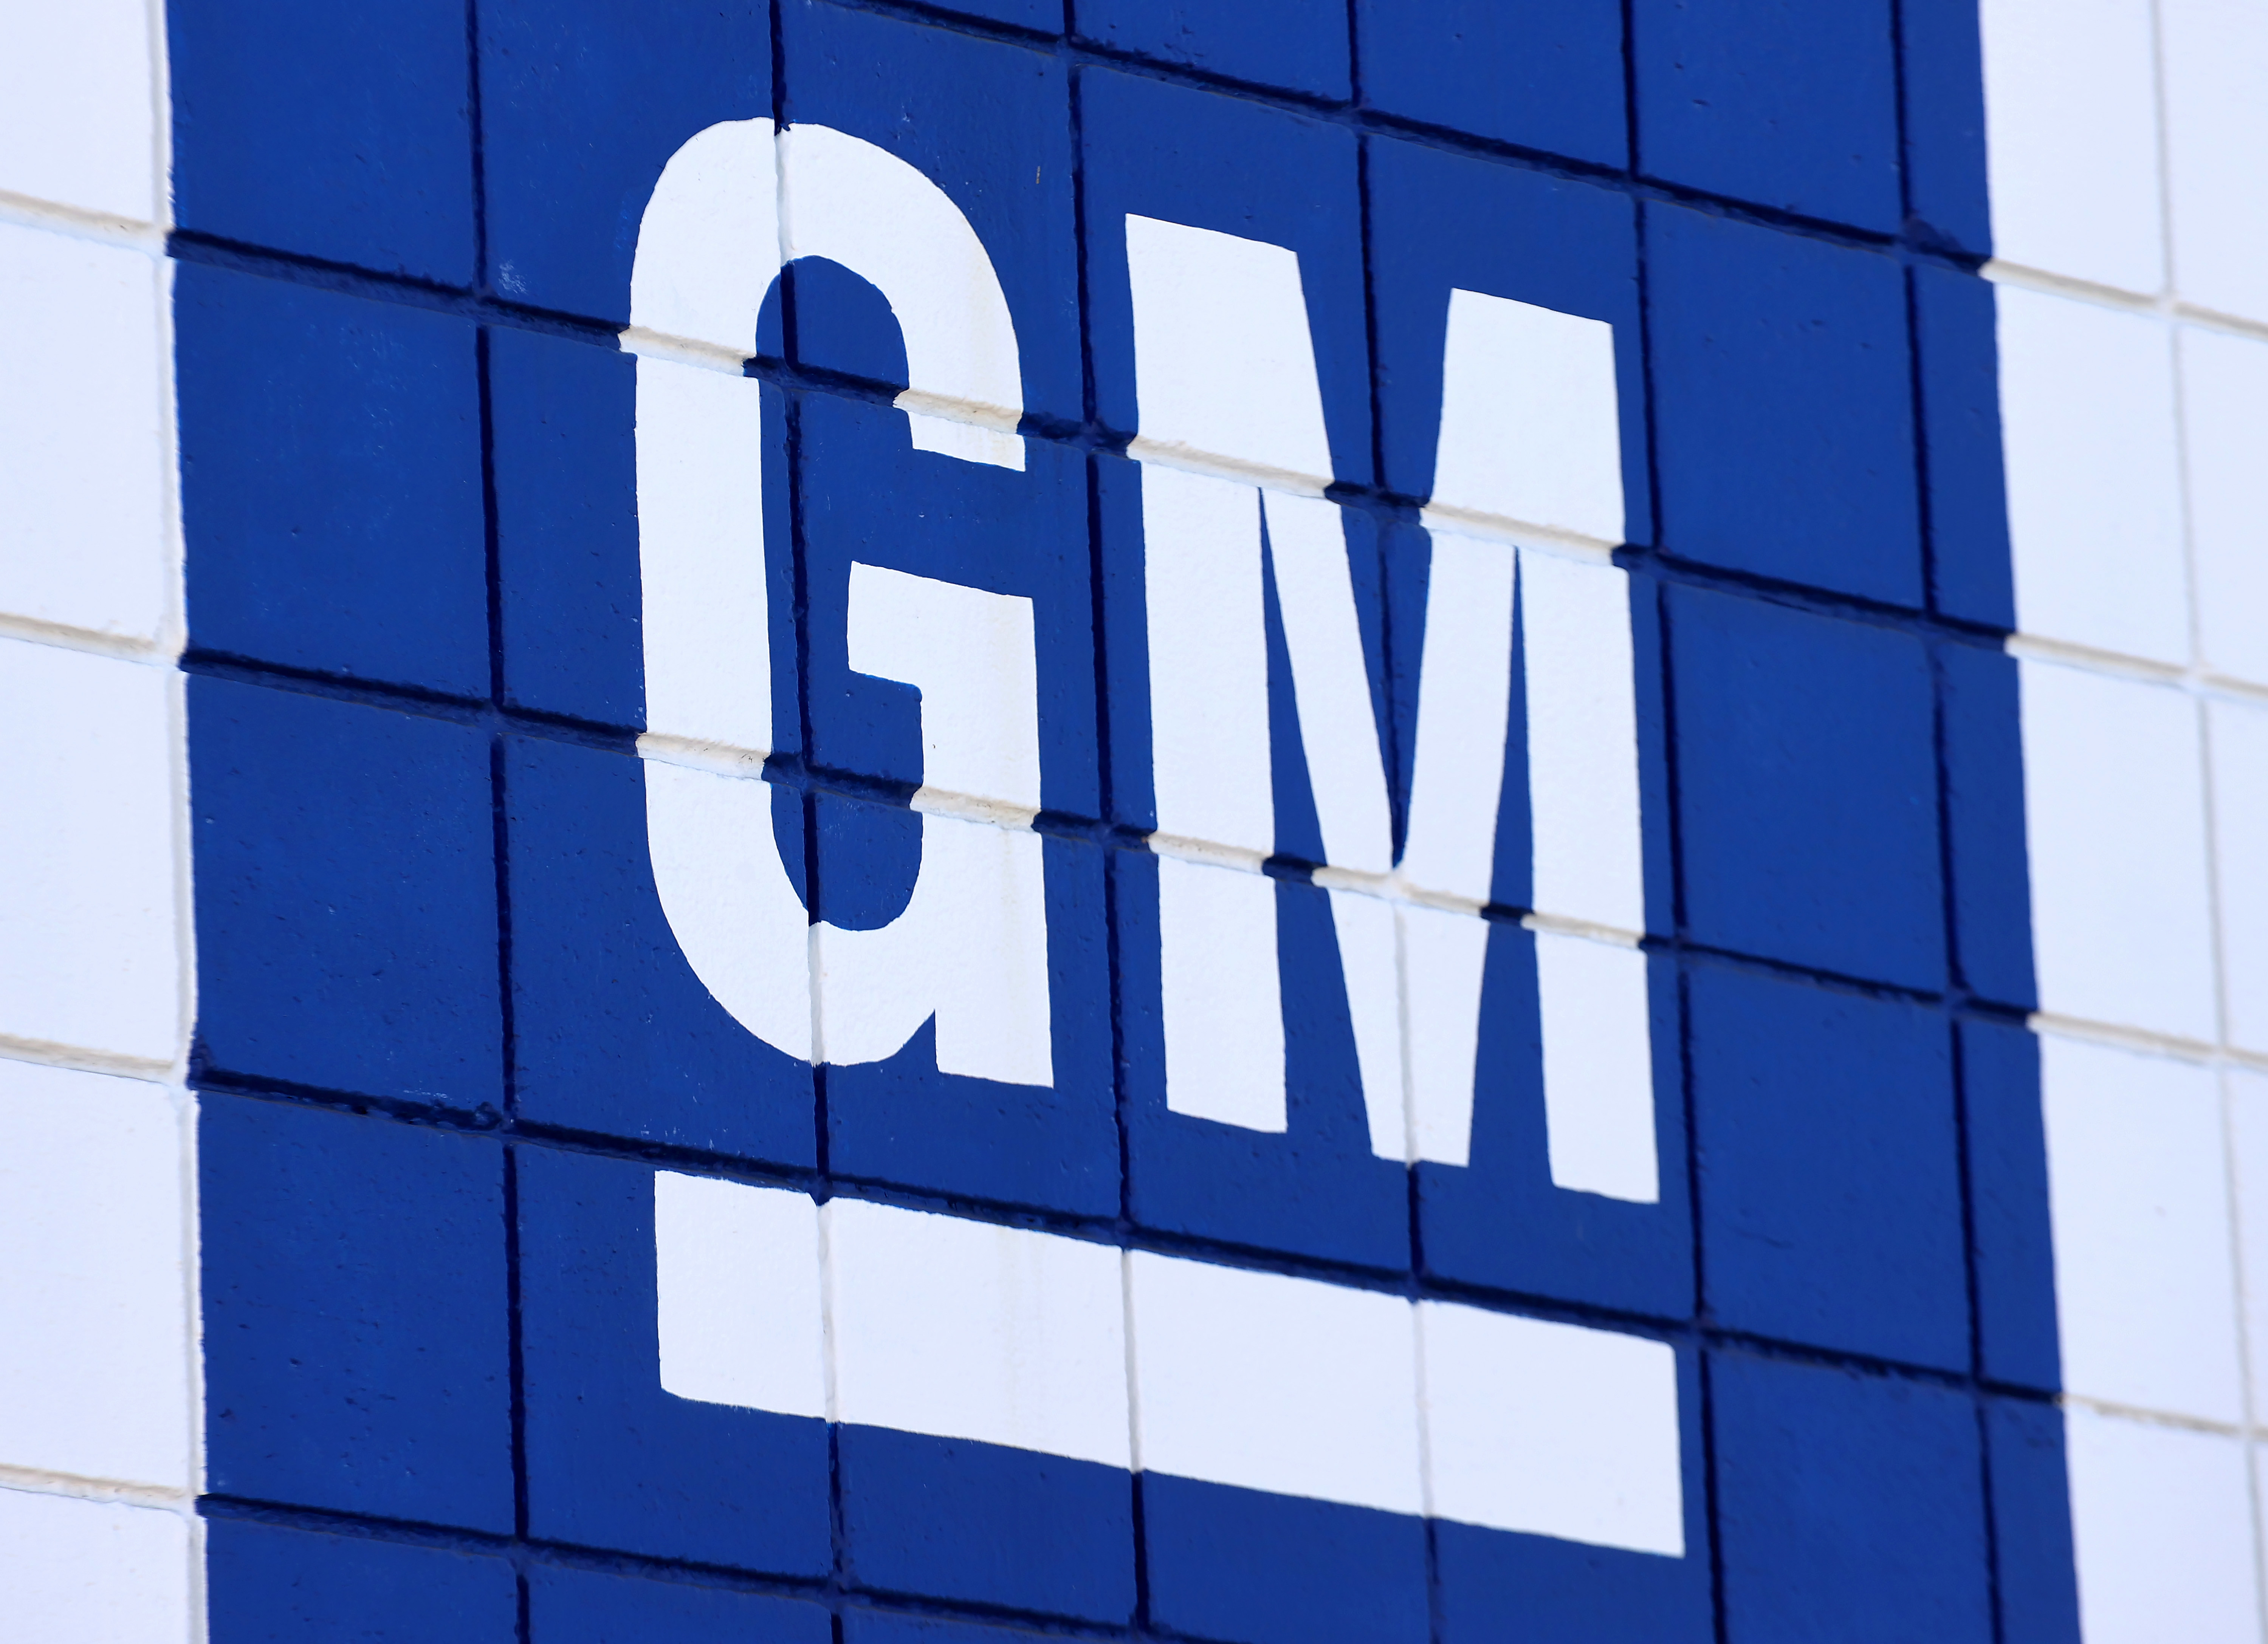 General Motors drives to big bottom line beat, eyes supply chain